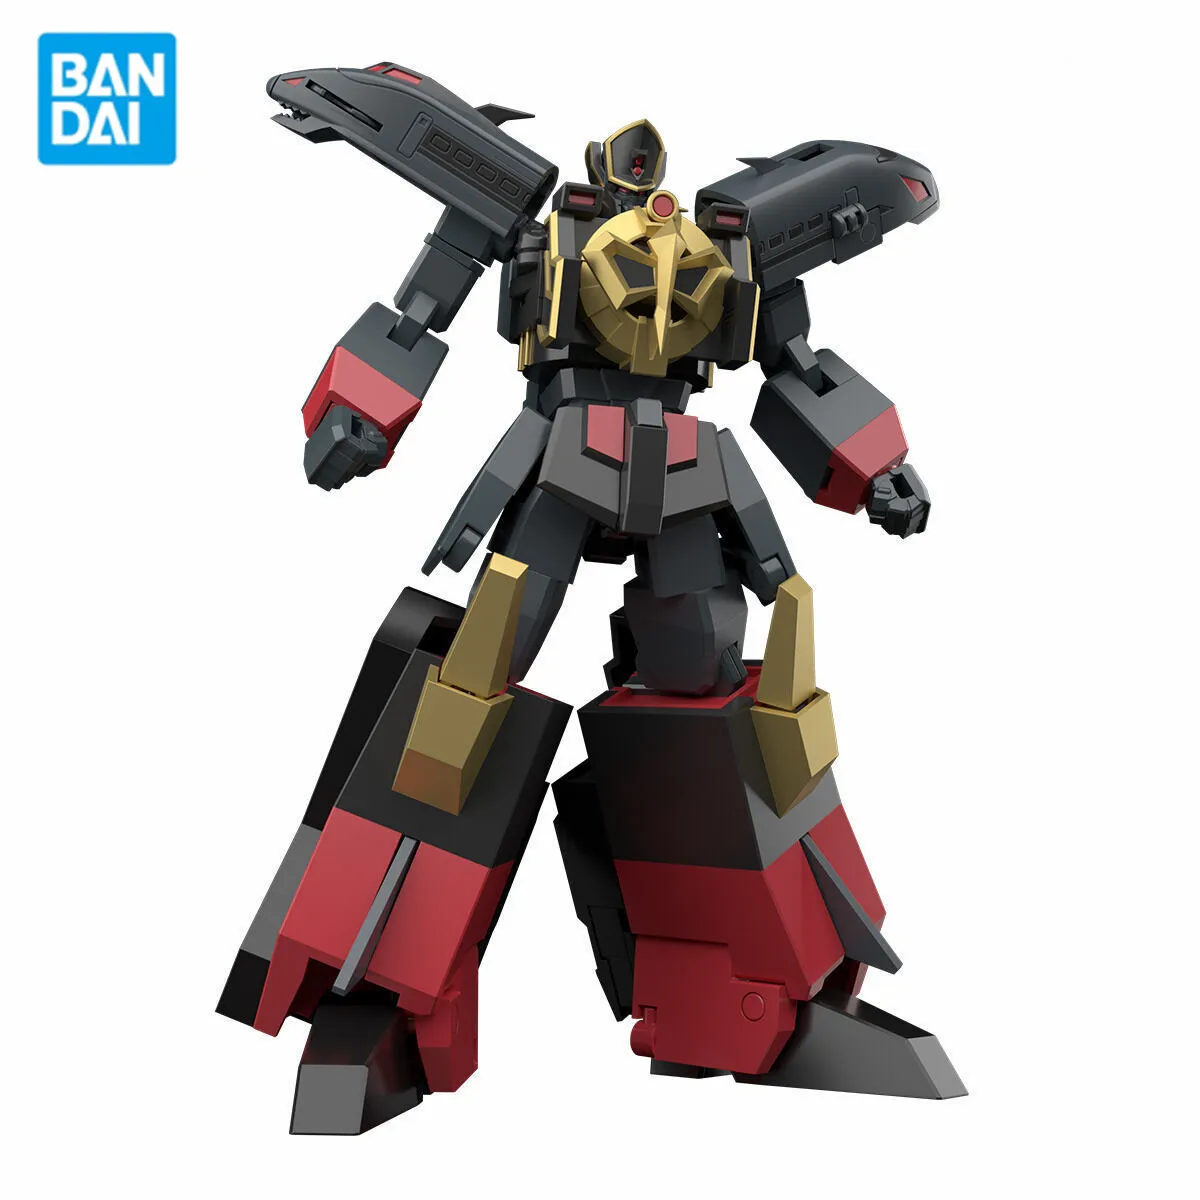 

Bandai SHOKUGAN Anime Figure The Brave Express Might Gaine PVC Action Figures Black Mightgaine Model Toys Doll Gift Juguetes